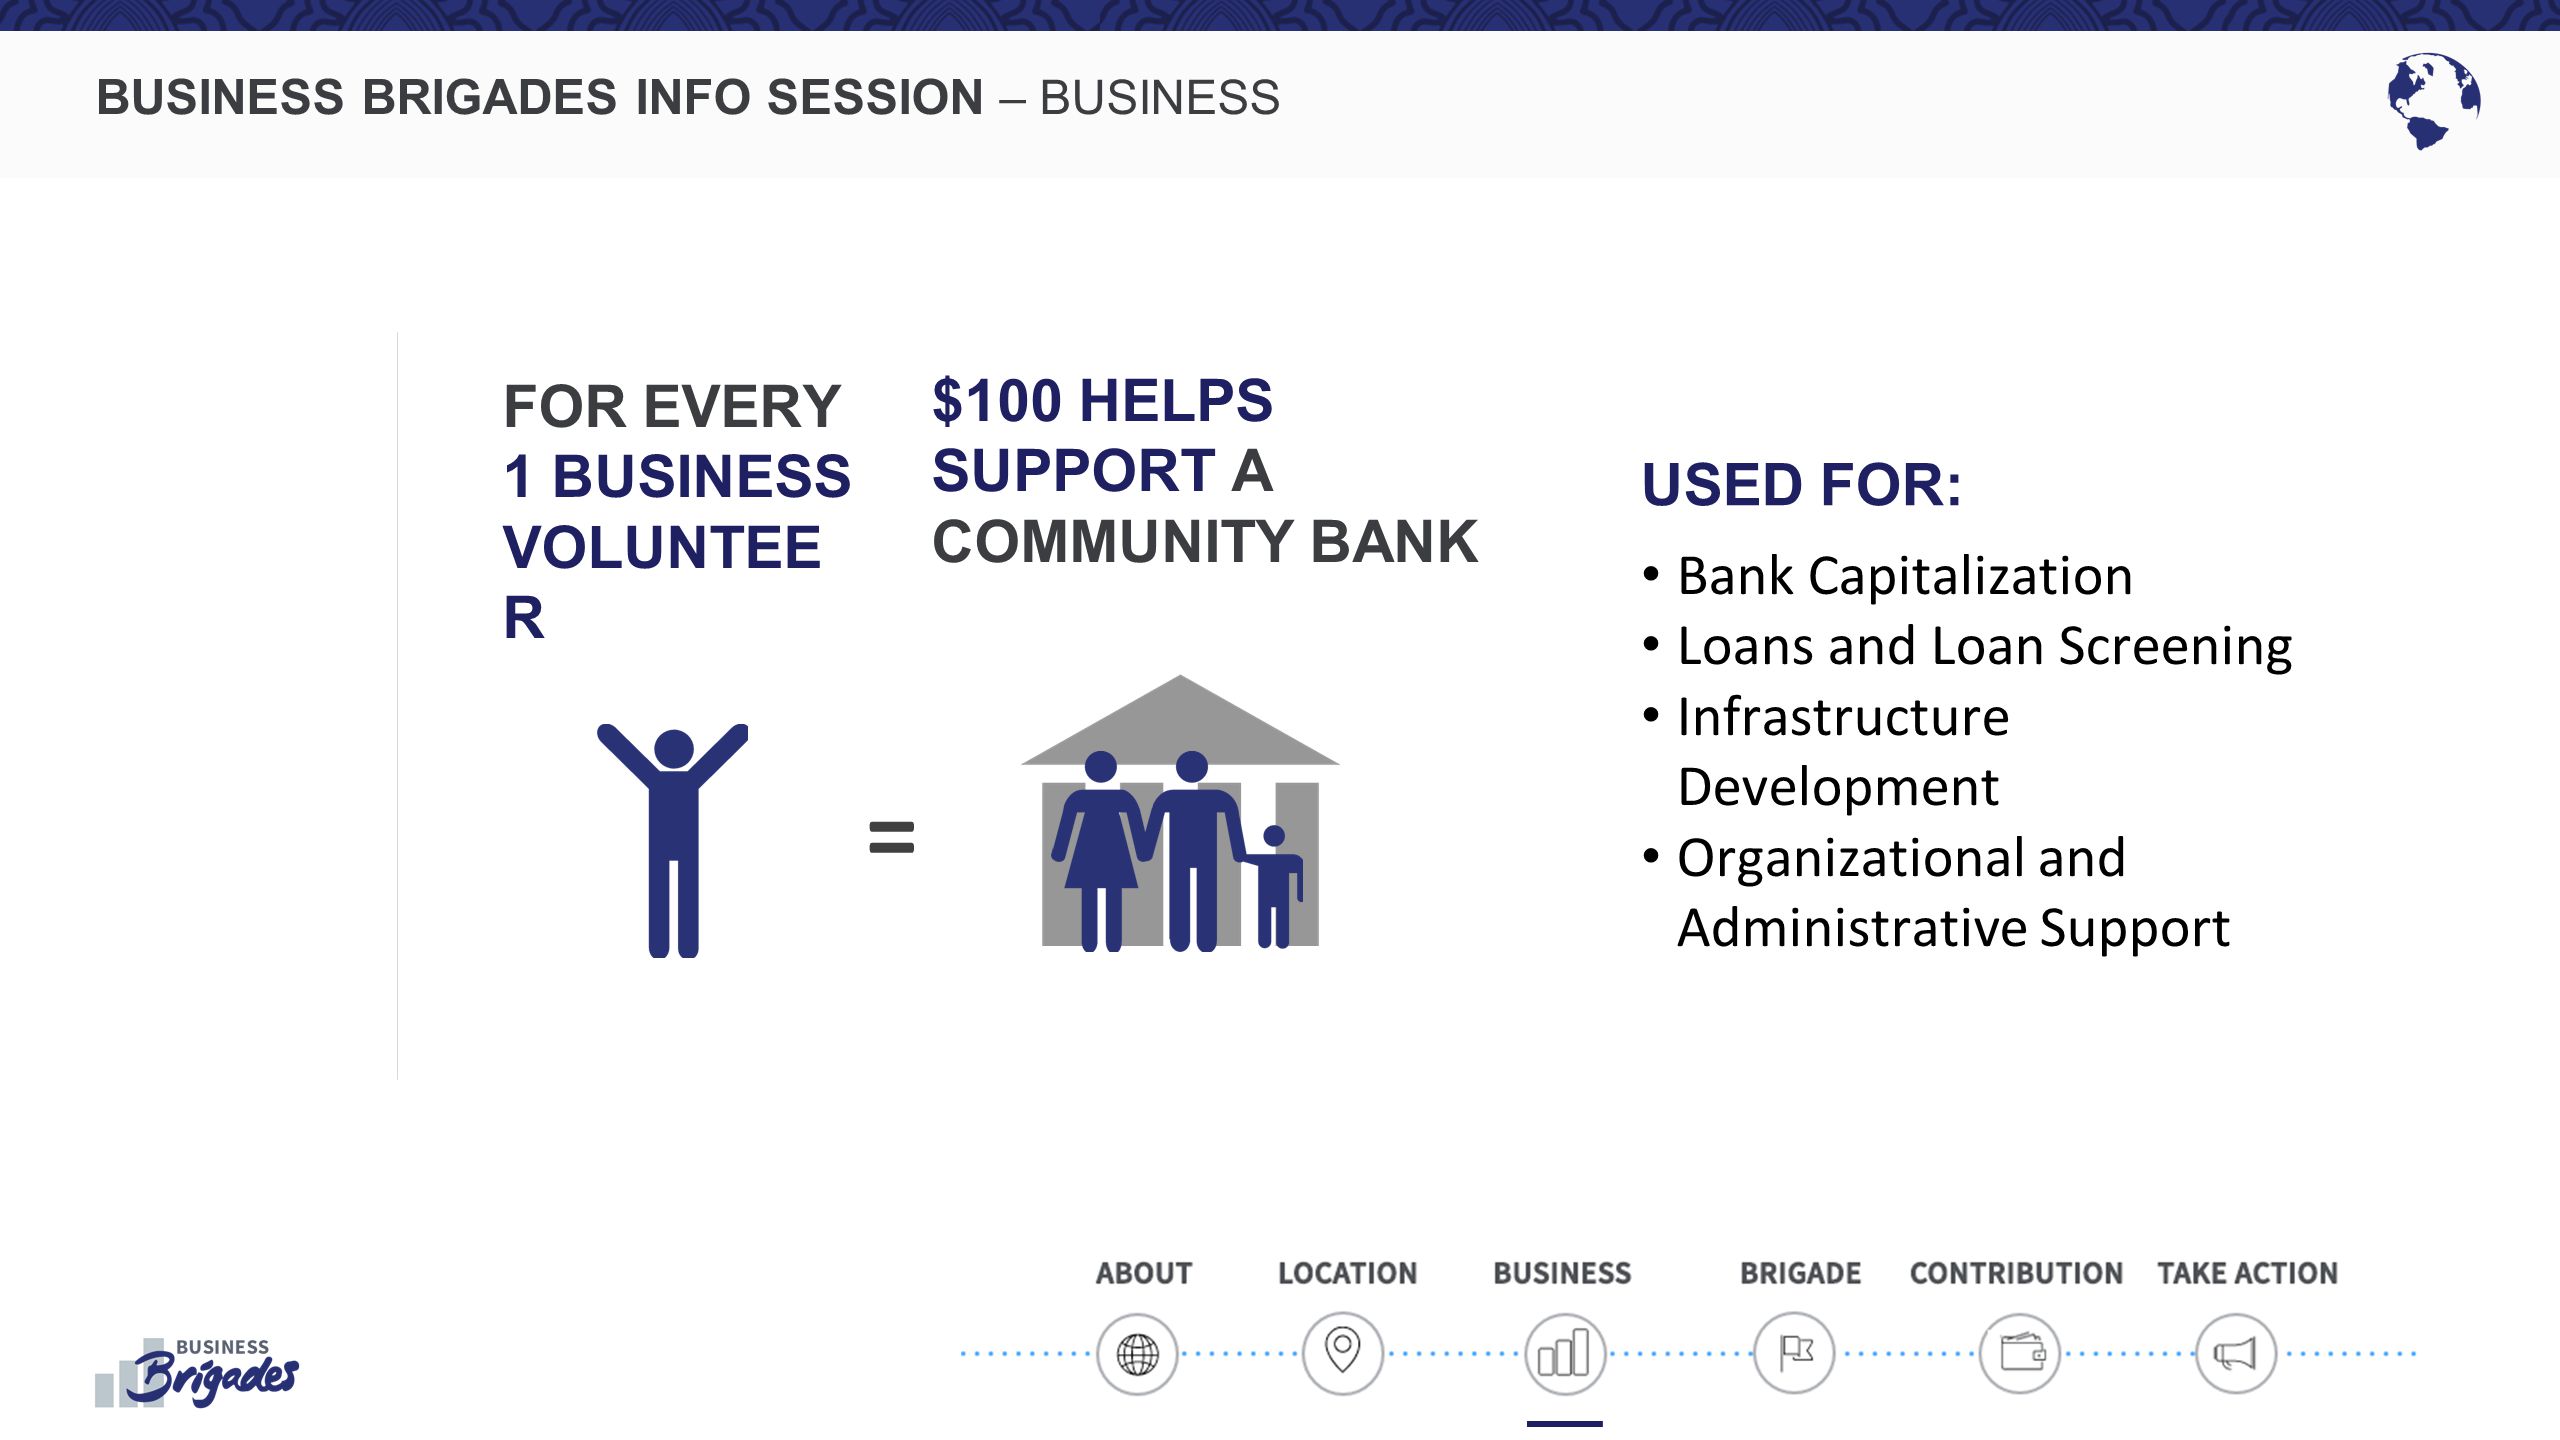 BUSINESS BRIGADES INFO SESSION – BUSINESS FOR EVERY 1 BUSINESS VOLUNTEE R $100 HELPS SUPPORT A COMMUNITY BANK = Bank Capitalization Loans and Loan Screening Infrastructure Development Organizational and Administrative Support USED FOR: